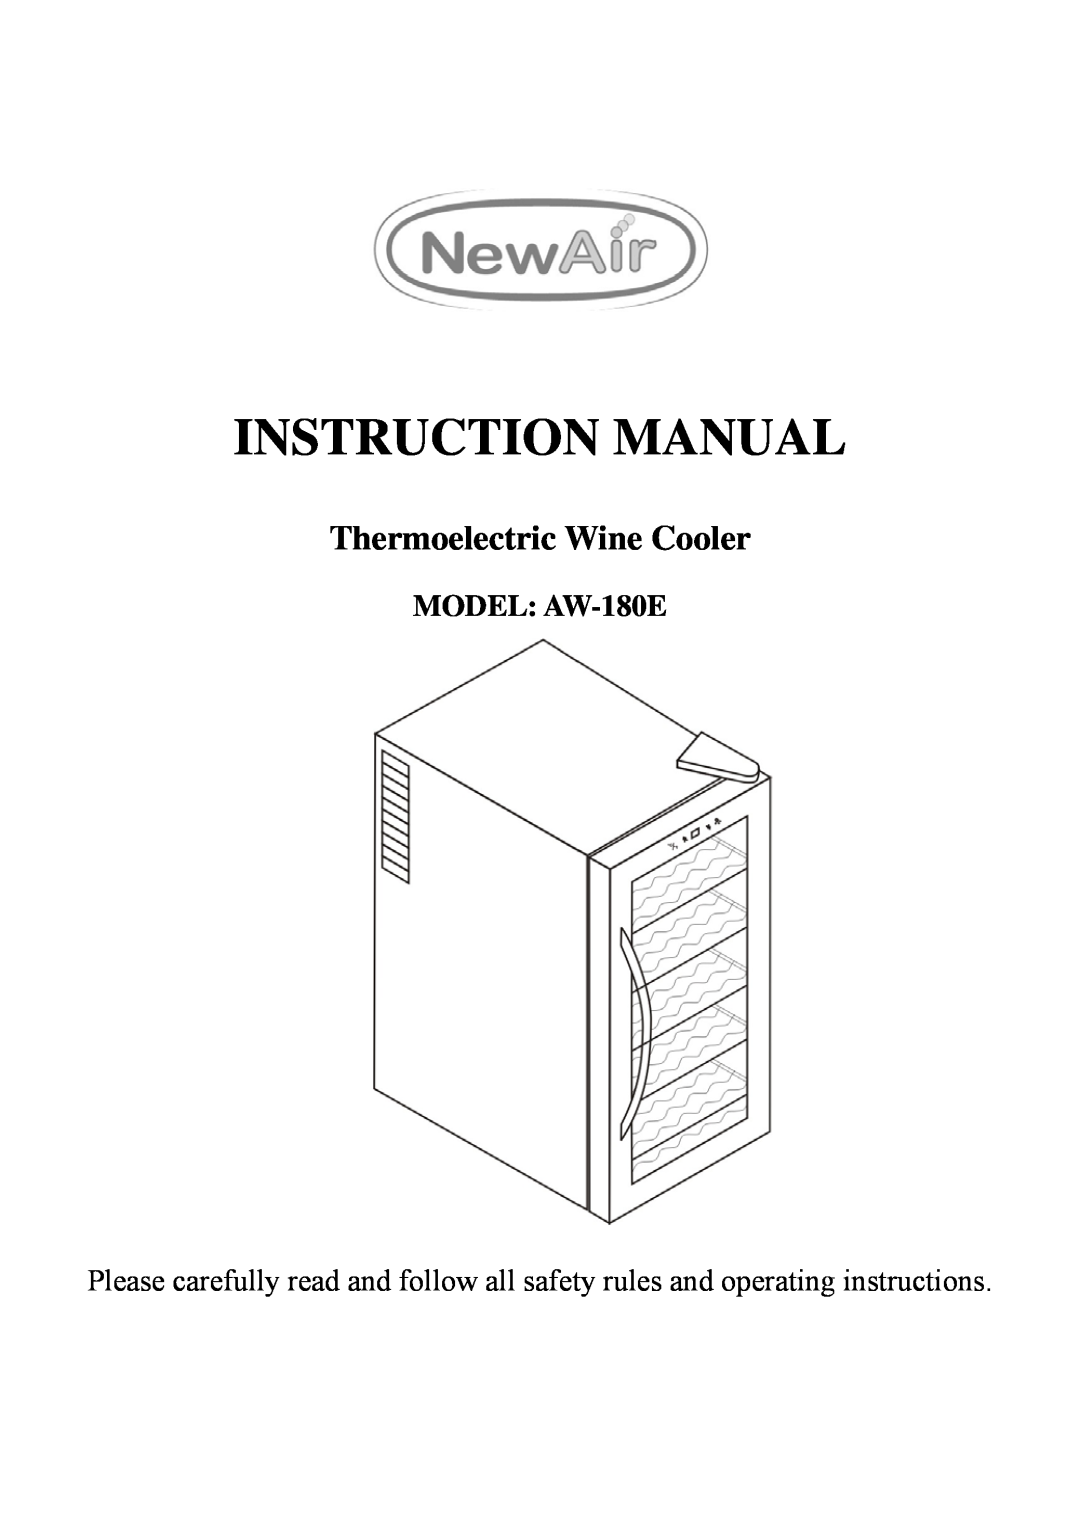 NewAir instruction manual MODEL AW-180E, Thermoelectric Wine Cooler 